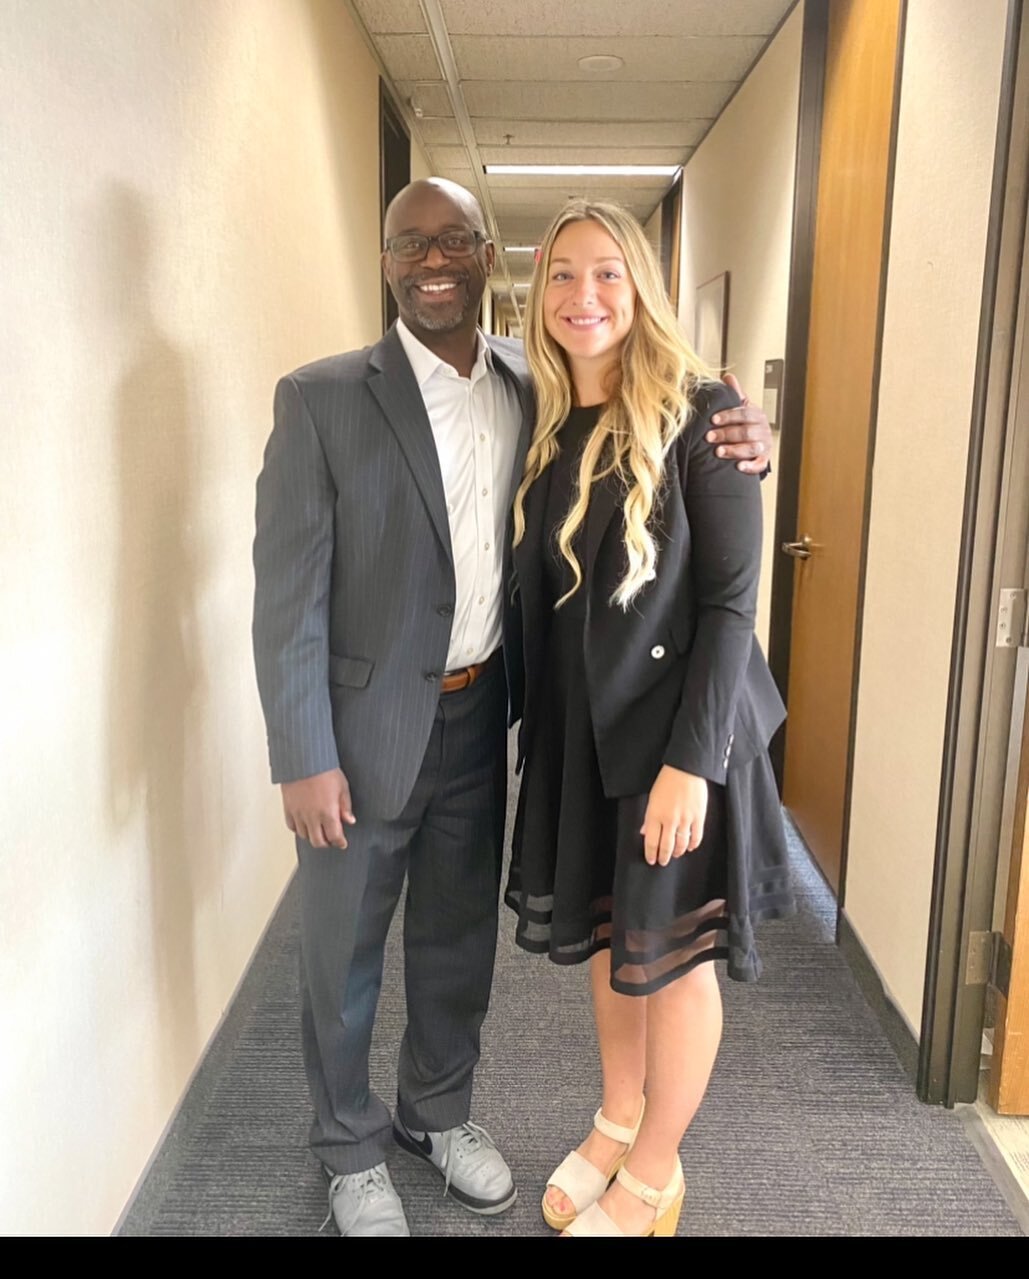 Summer Young and Hennepin County Chief Judge, Todd Barnette.  One of the most invaluable things as a new attorney is to surround yourself with mentors who know the law and have lots of experience. Summer was lucky enough to work with all 63 Judges in